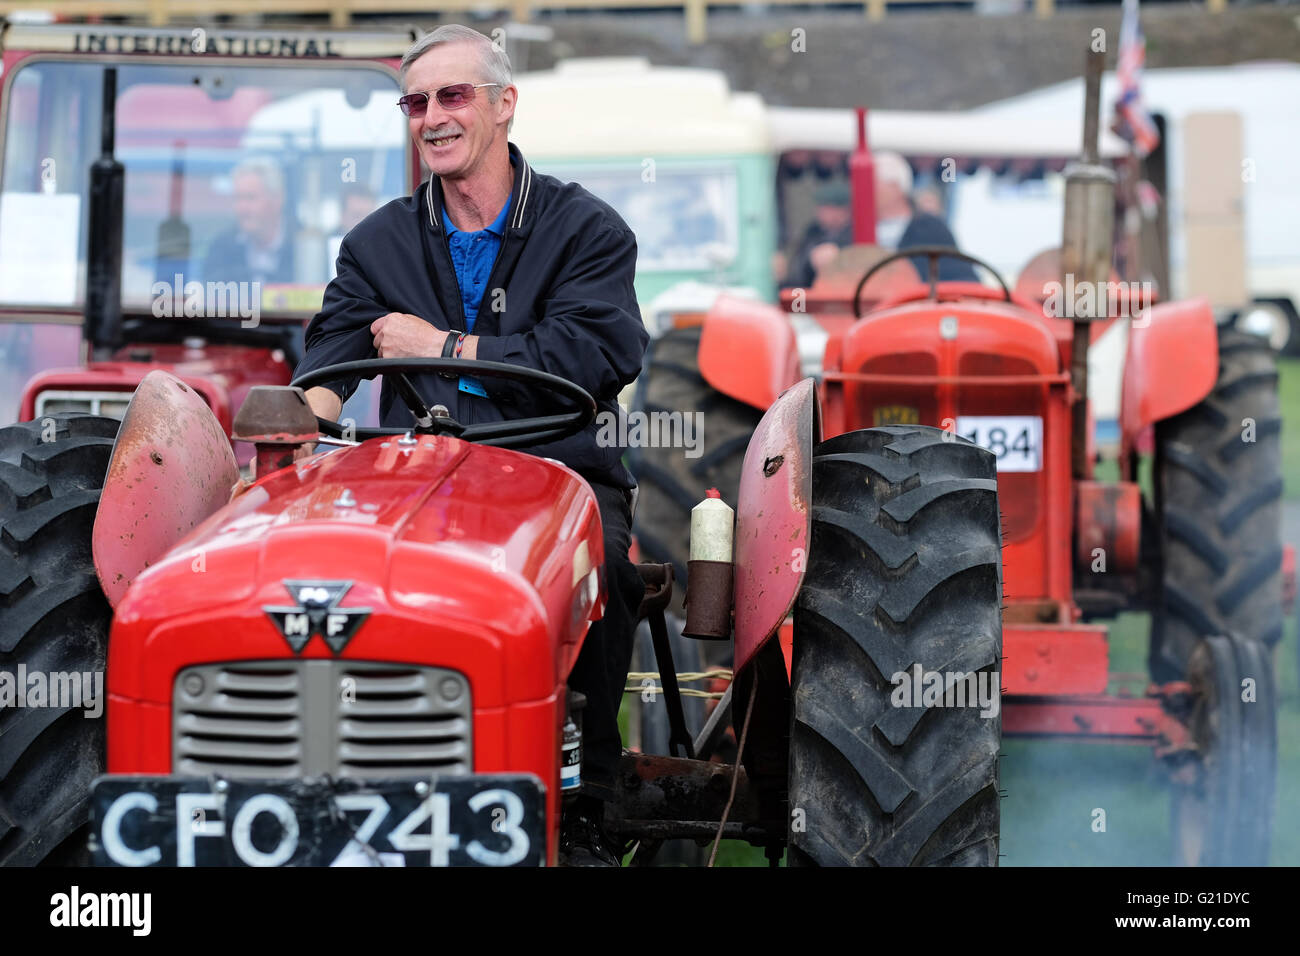 Royal Welsh Spring Festival, Sunday 22nd May 2016 - A farmer enjoys a laugh as the old tractors start their engines waiting for start of the classic vehicle and vintage tractor parade in the main display arena on the second day of the Royal Welsh Spring Festival. Stock Photo